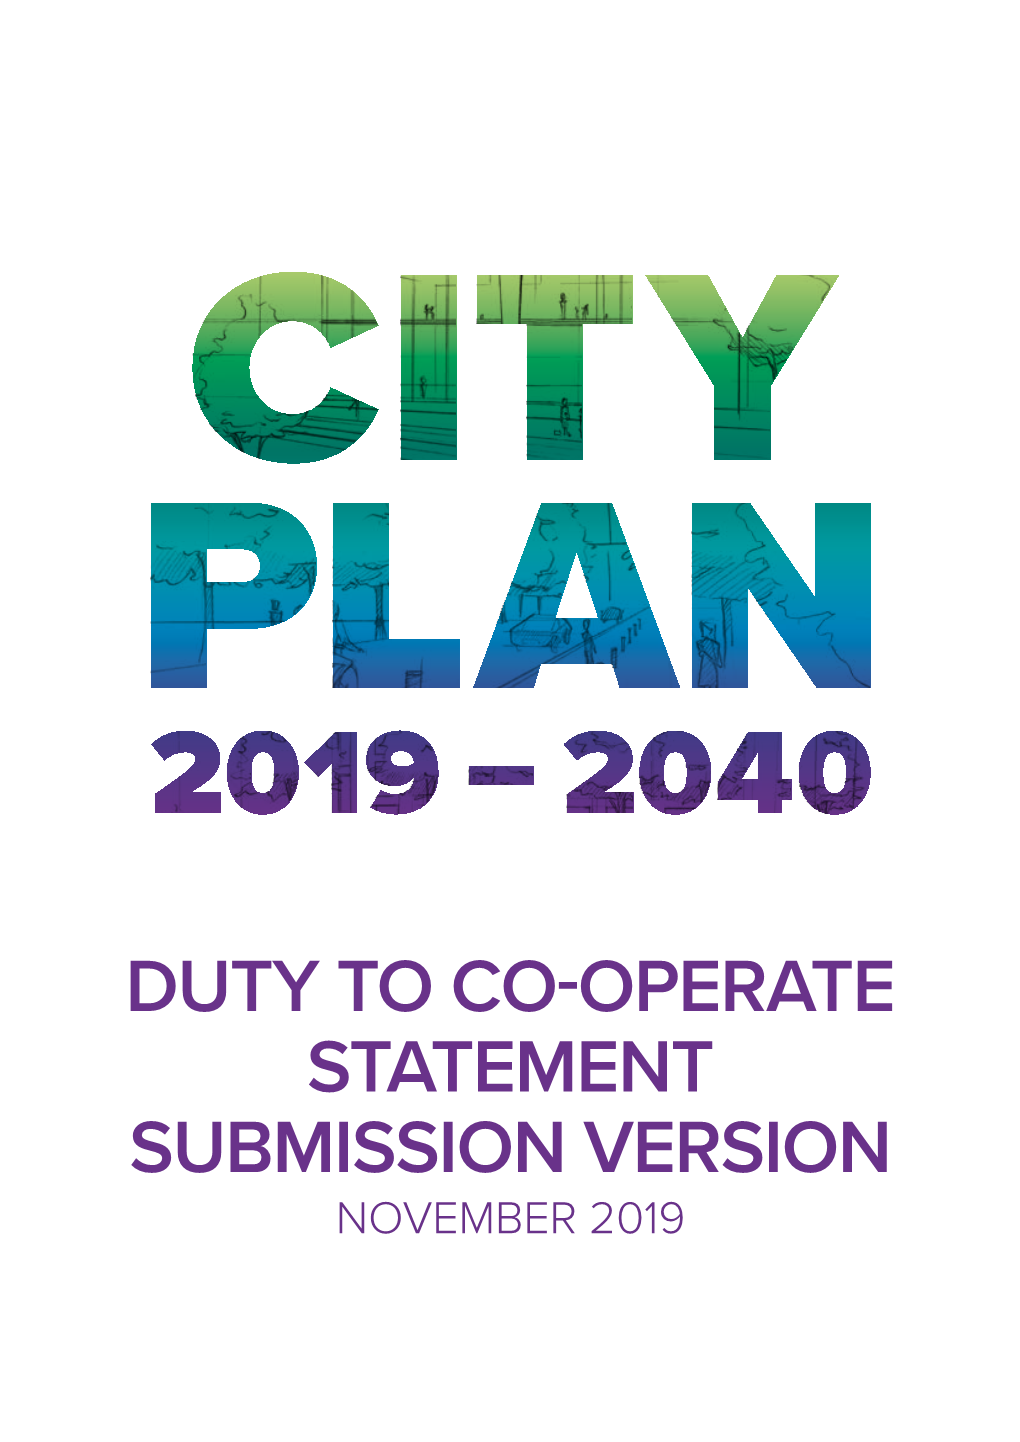 DUTY to CO-OPERATE STATEMENT SUBMISSION VERSION NOVEMBER 2019 Duty to Cooperate Statement (Submission) November 2019